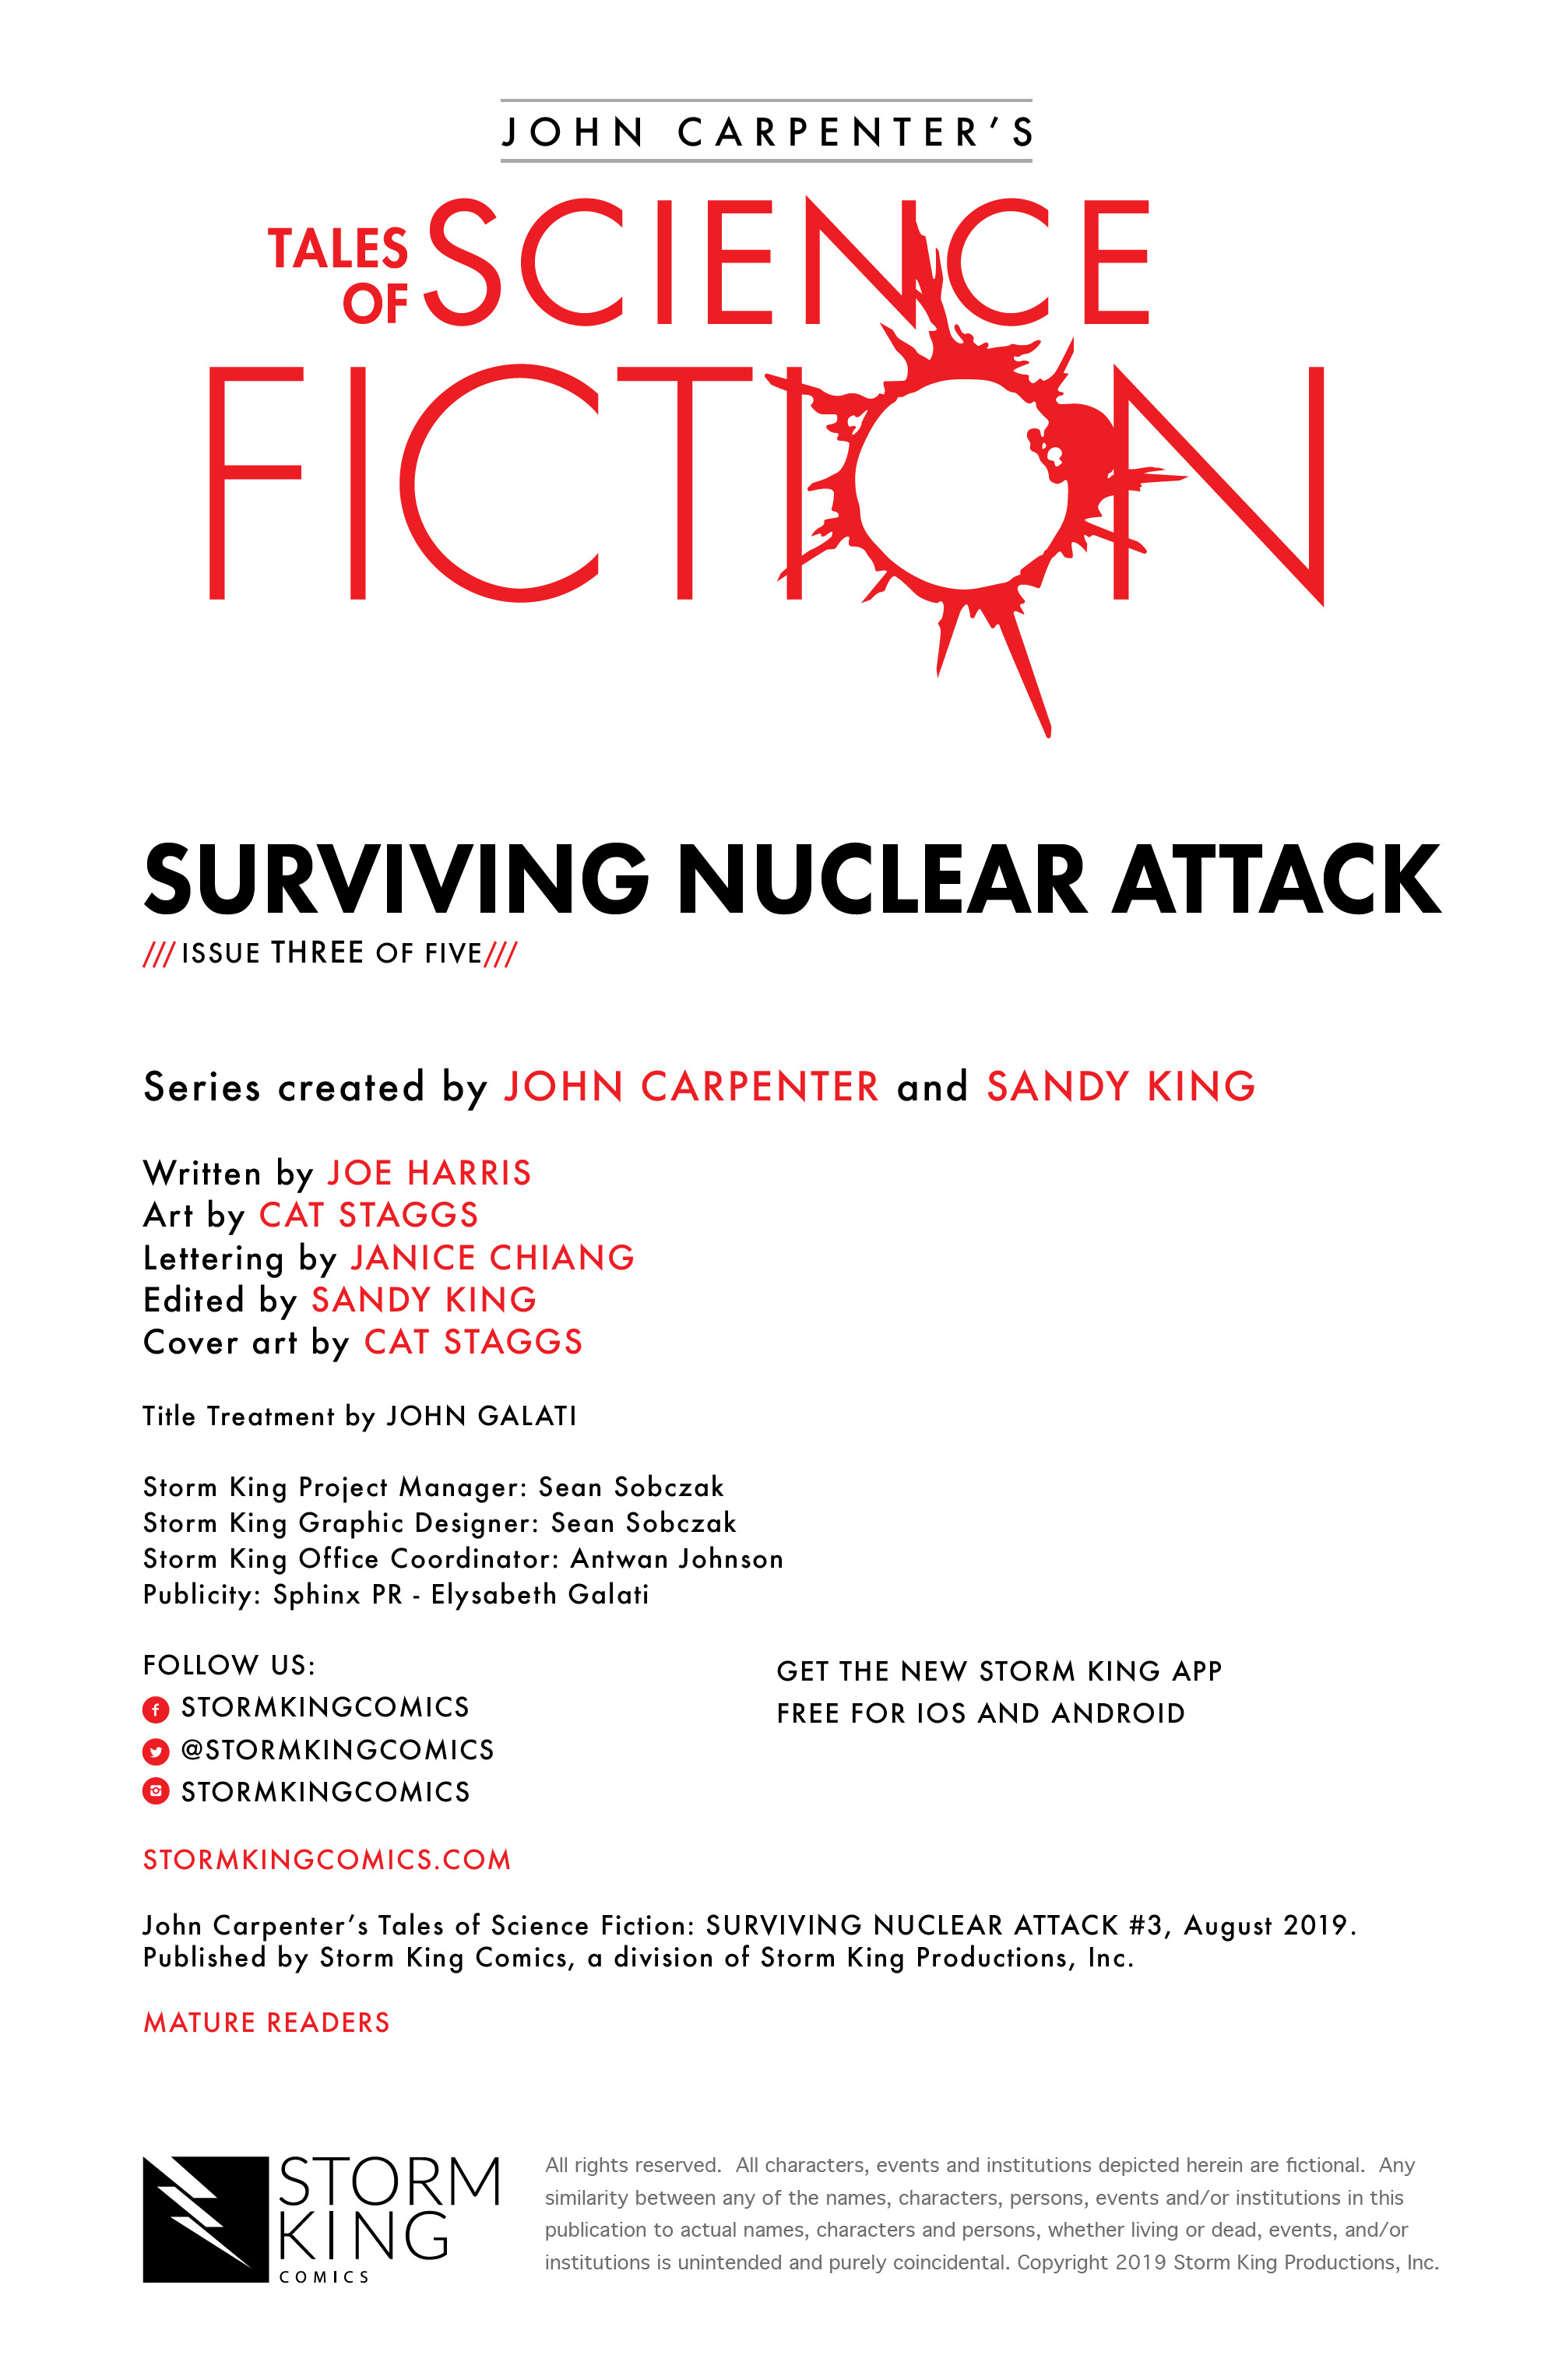 Read online John Carpenter's Tales of Science Fiction: Surviving Nuclear Attack comic -  Issue #3 - 2